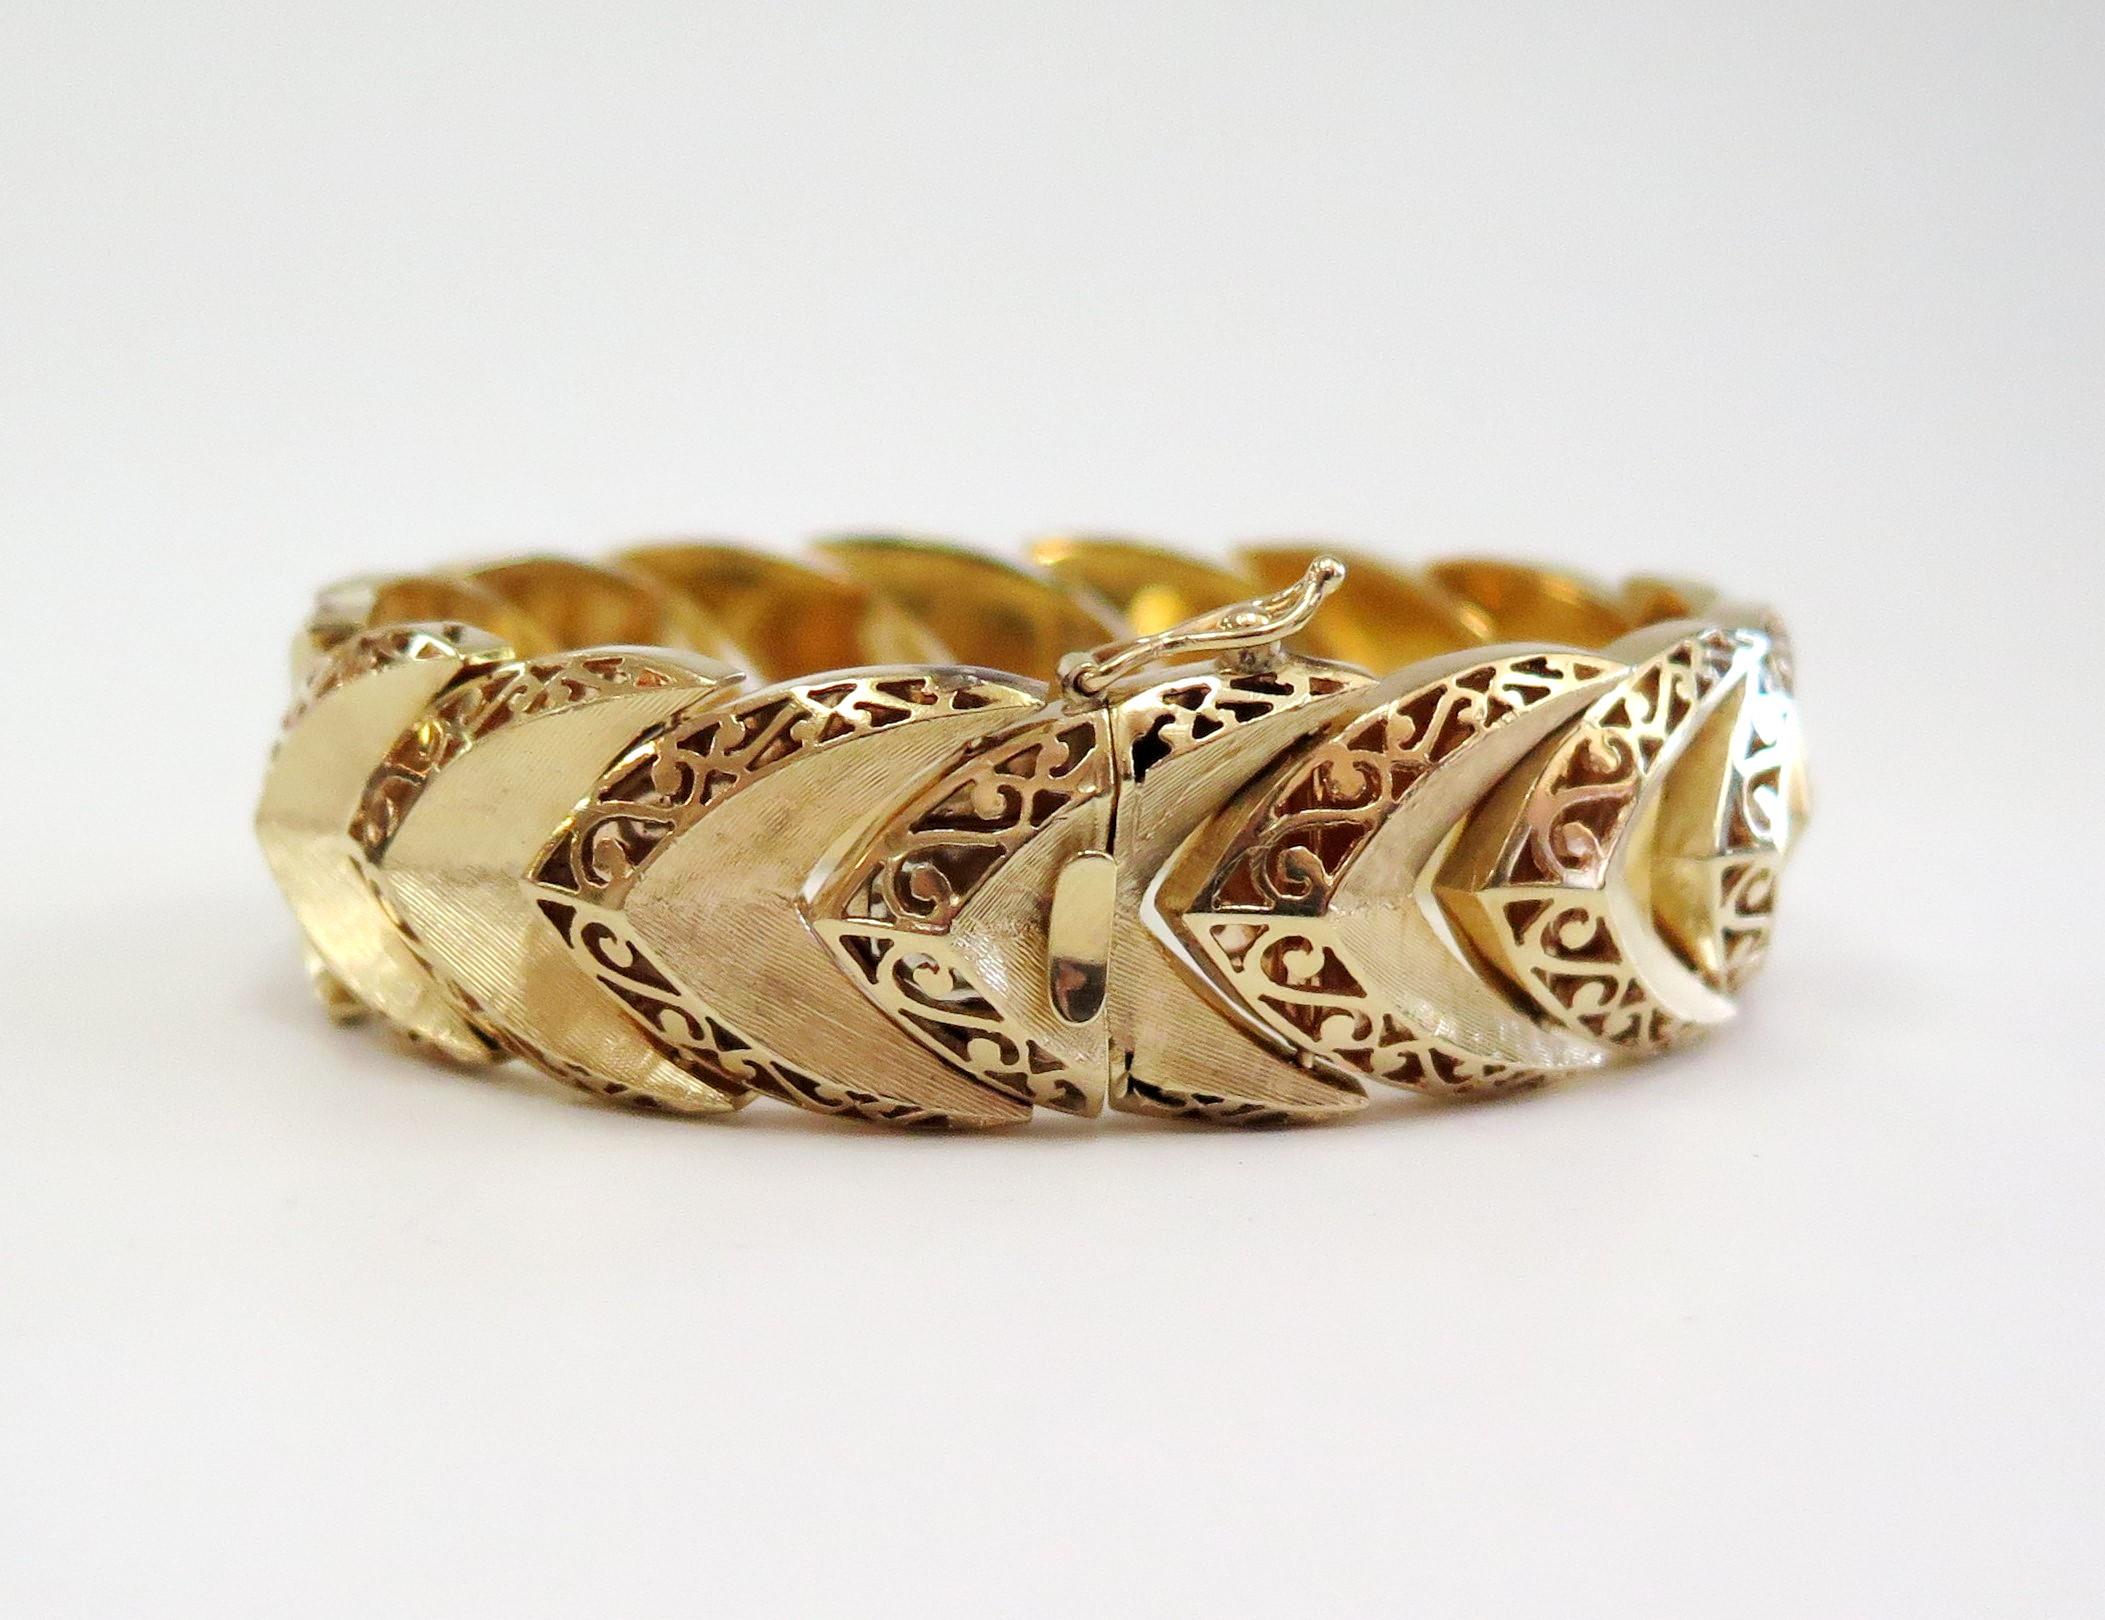 Wide Bracelet with Chevron and Scroll Design, 14 Karat Yellow Gold 10